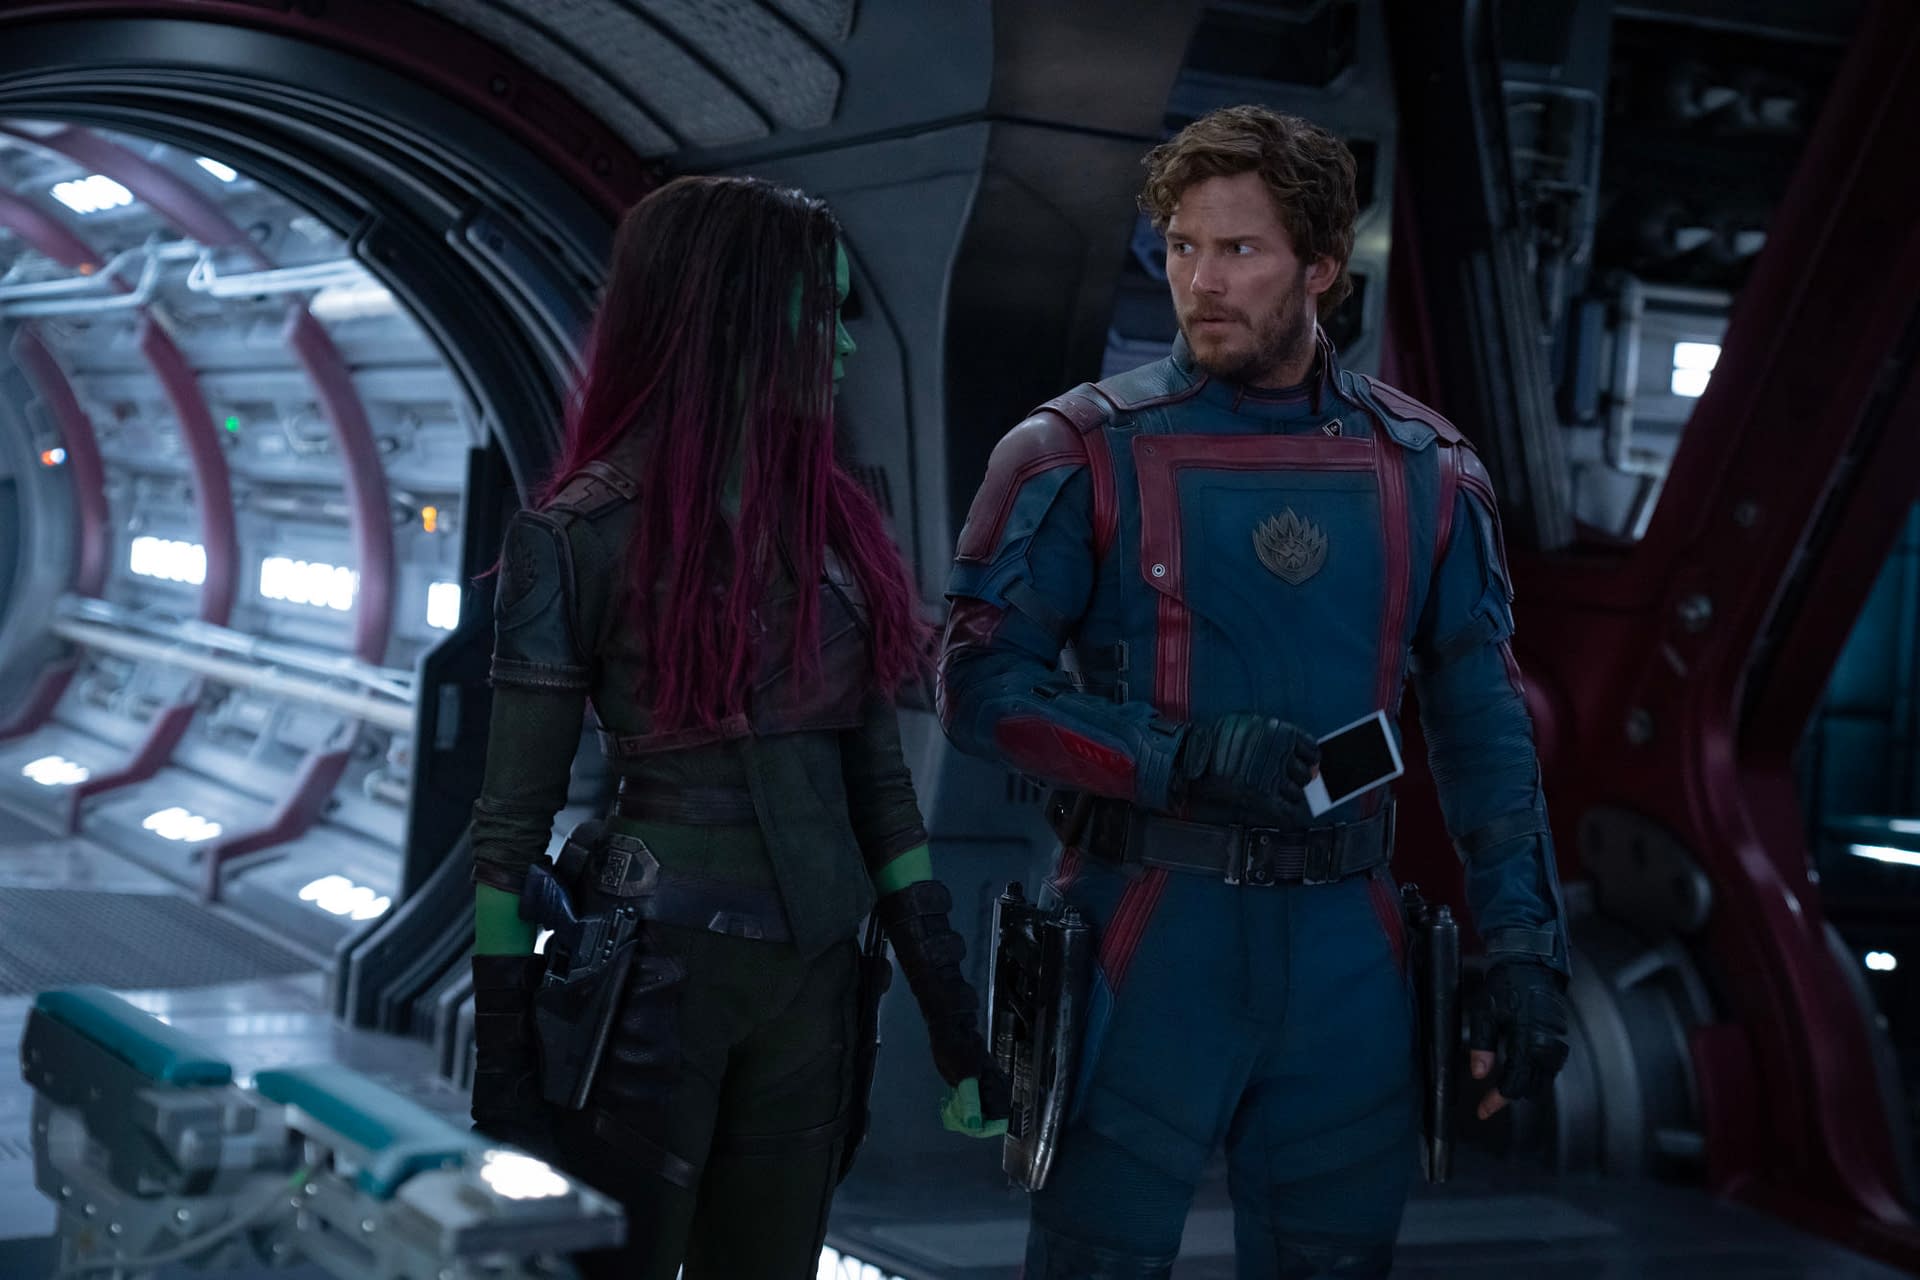 Guardians of the Galaxy Vol. 3: HQ Image of Peter and Gamora Released